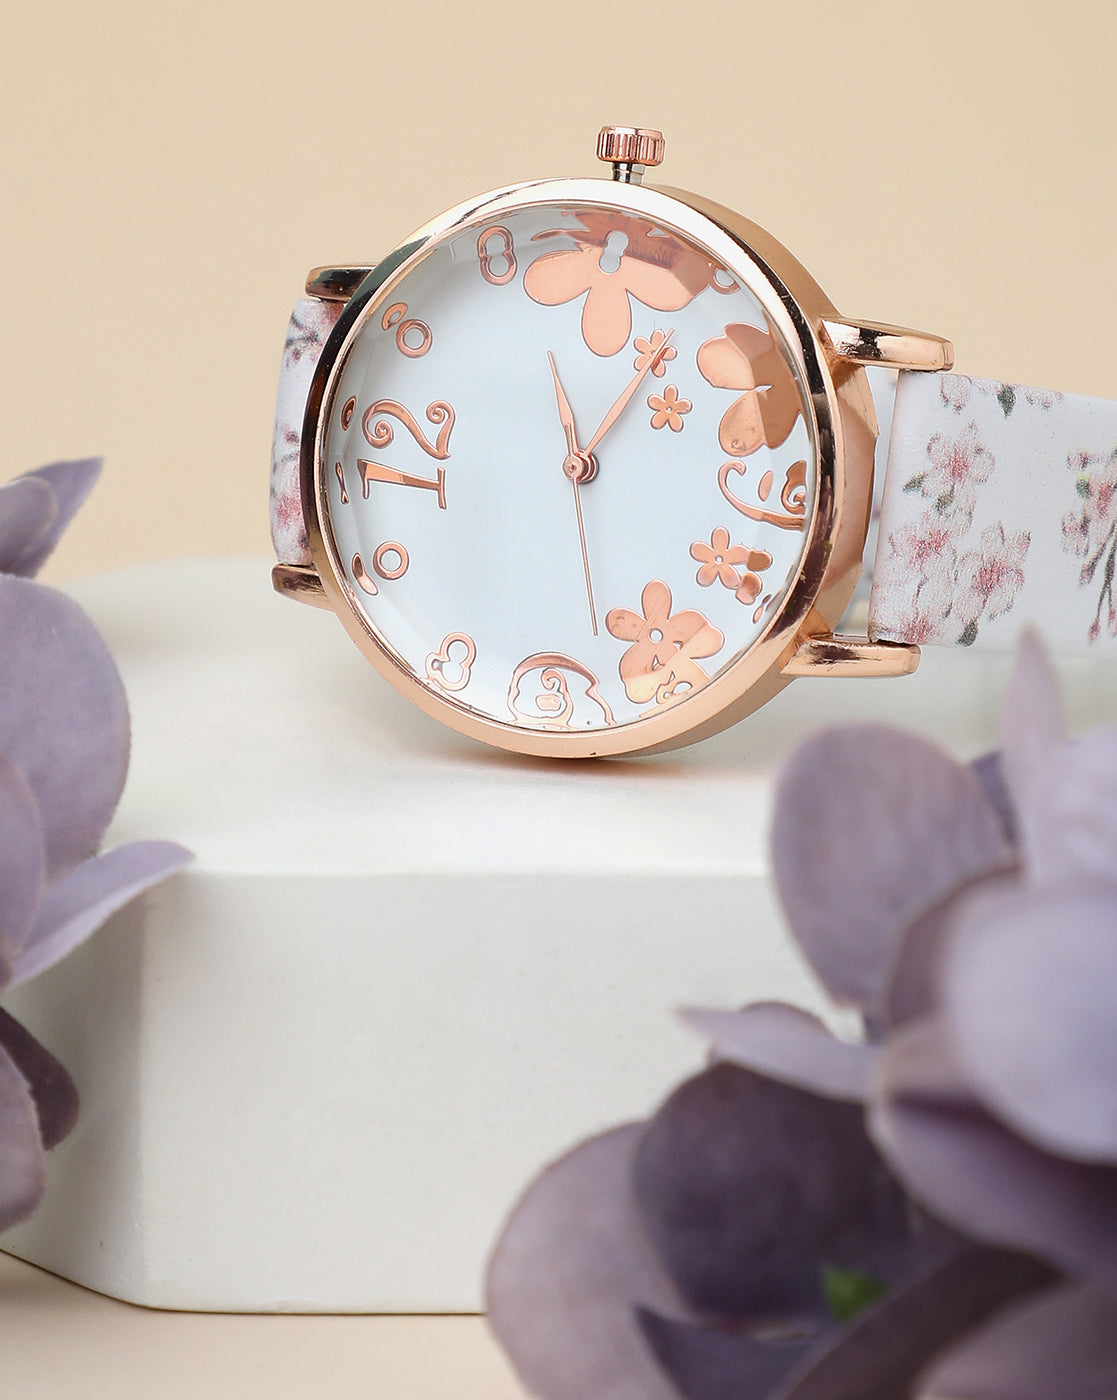 White & Gold Decorative Analog Round Dial With Floral Printed Leather Strap